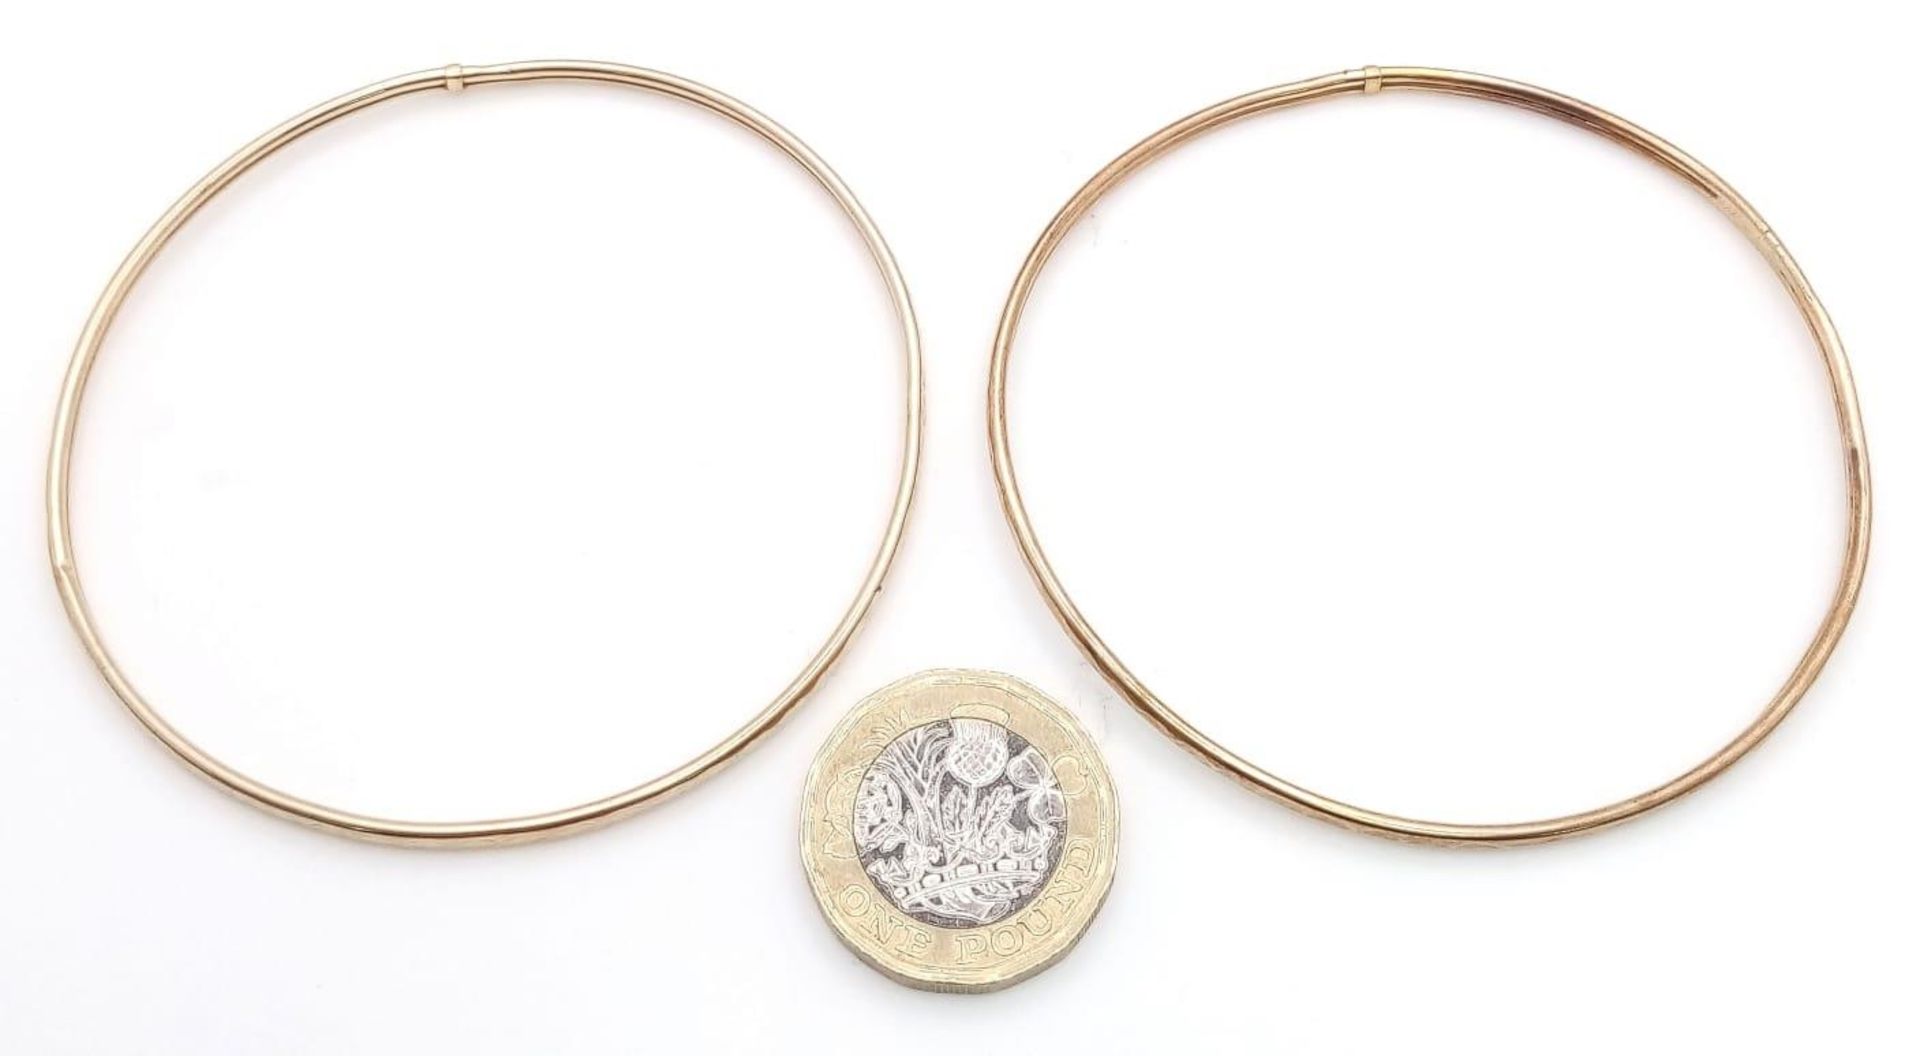 Set of 2x 9K Yellow Gold (tested as) Patterned Bangle , 6.1g total weight, 6.5cm diameter - Bild 3 aus 3